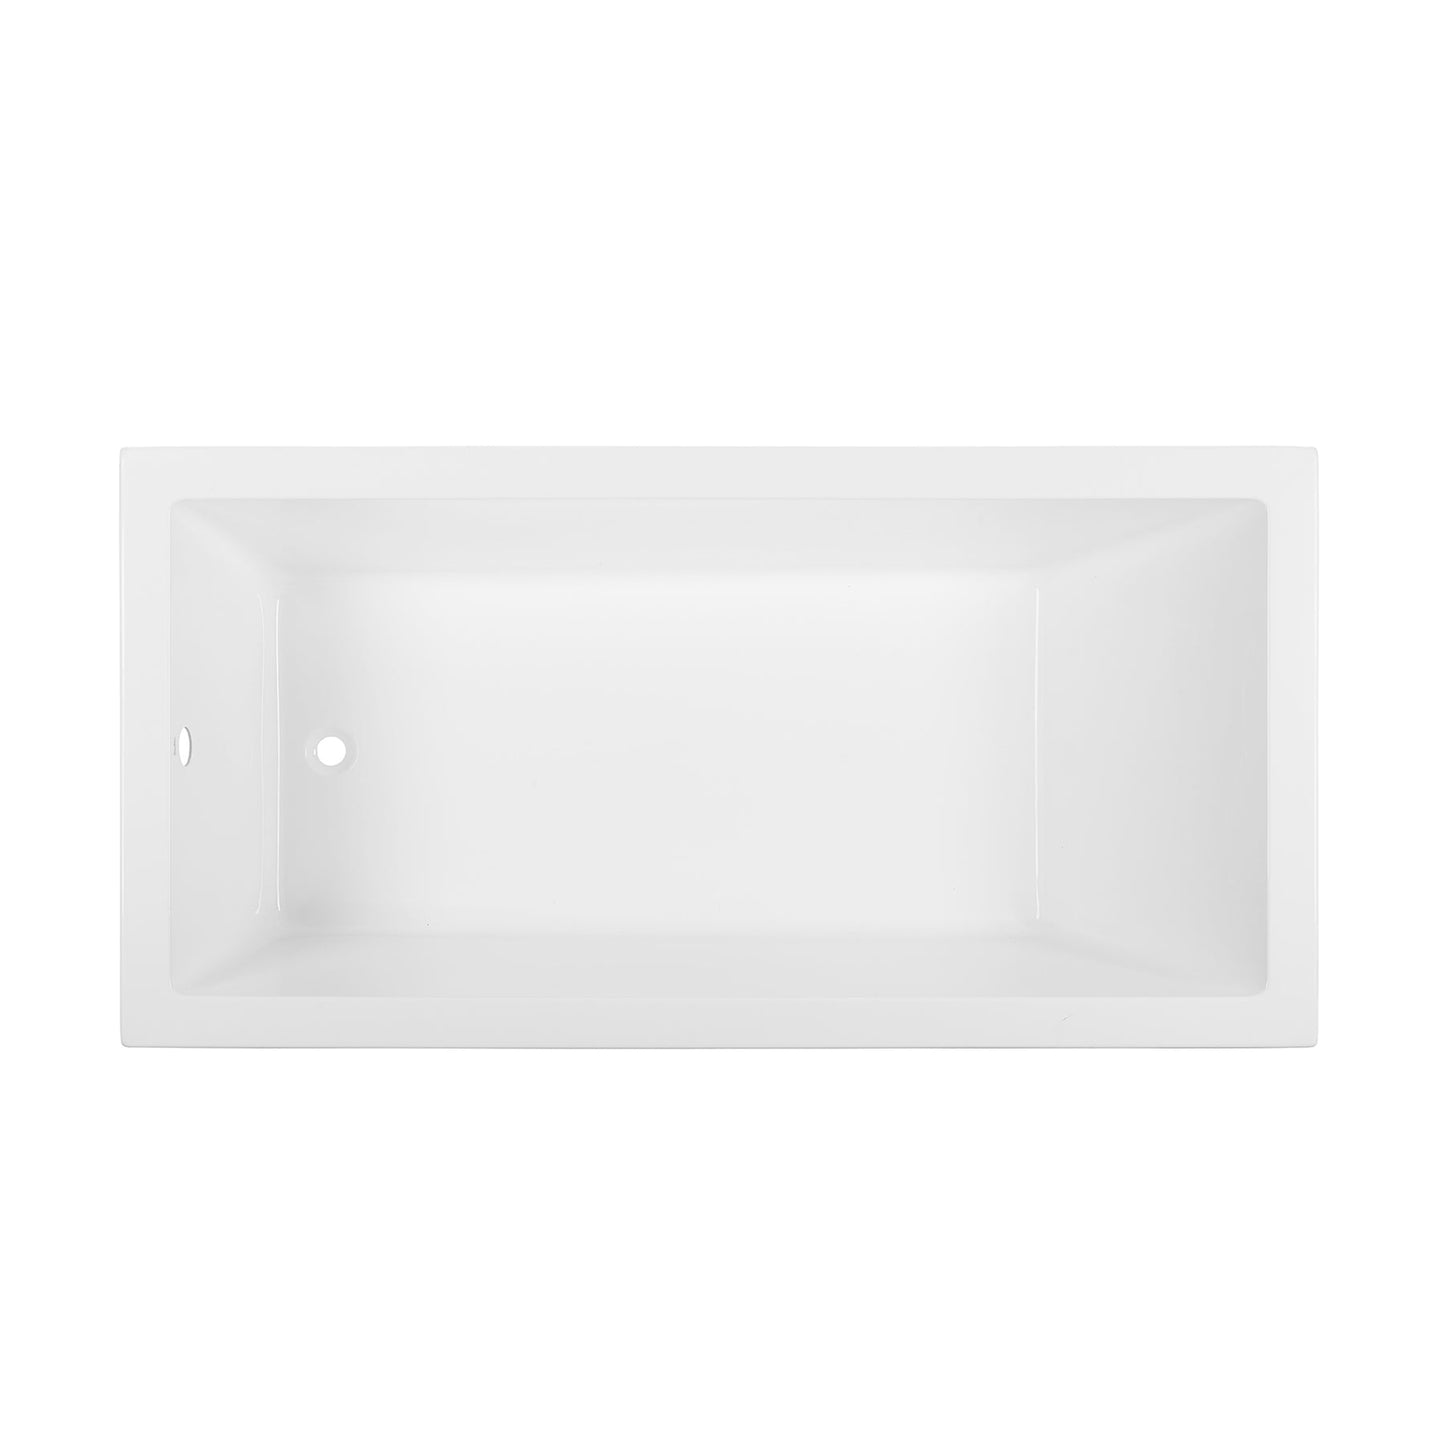 Swiss Madison Voltaire 72" x 36" White Reversible Drain Drop-In Bathtub With Adjustable Feet